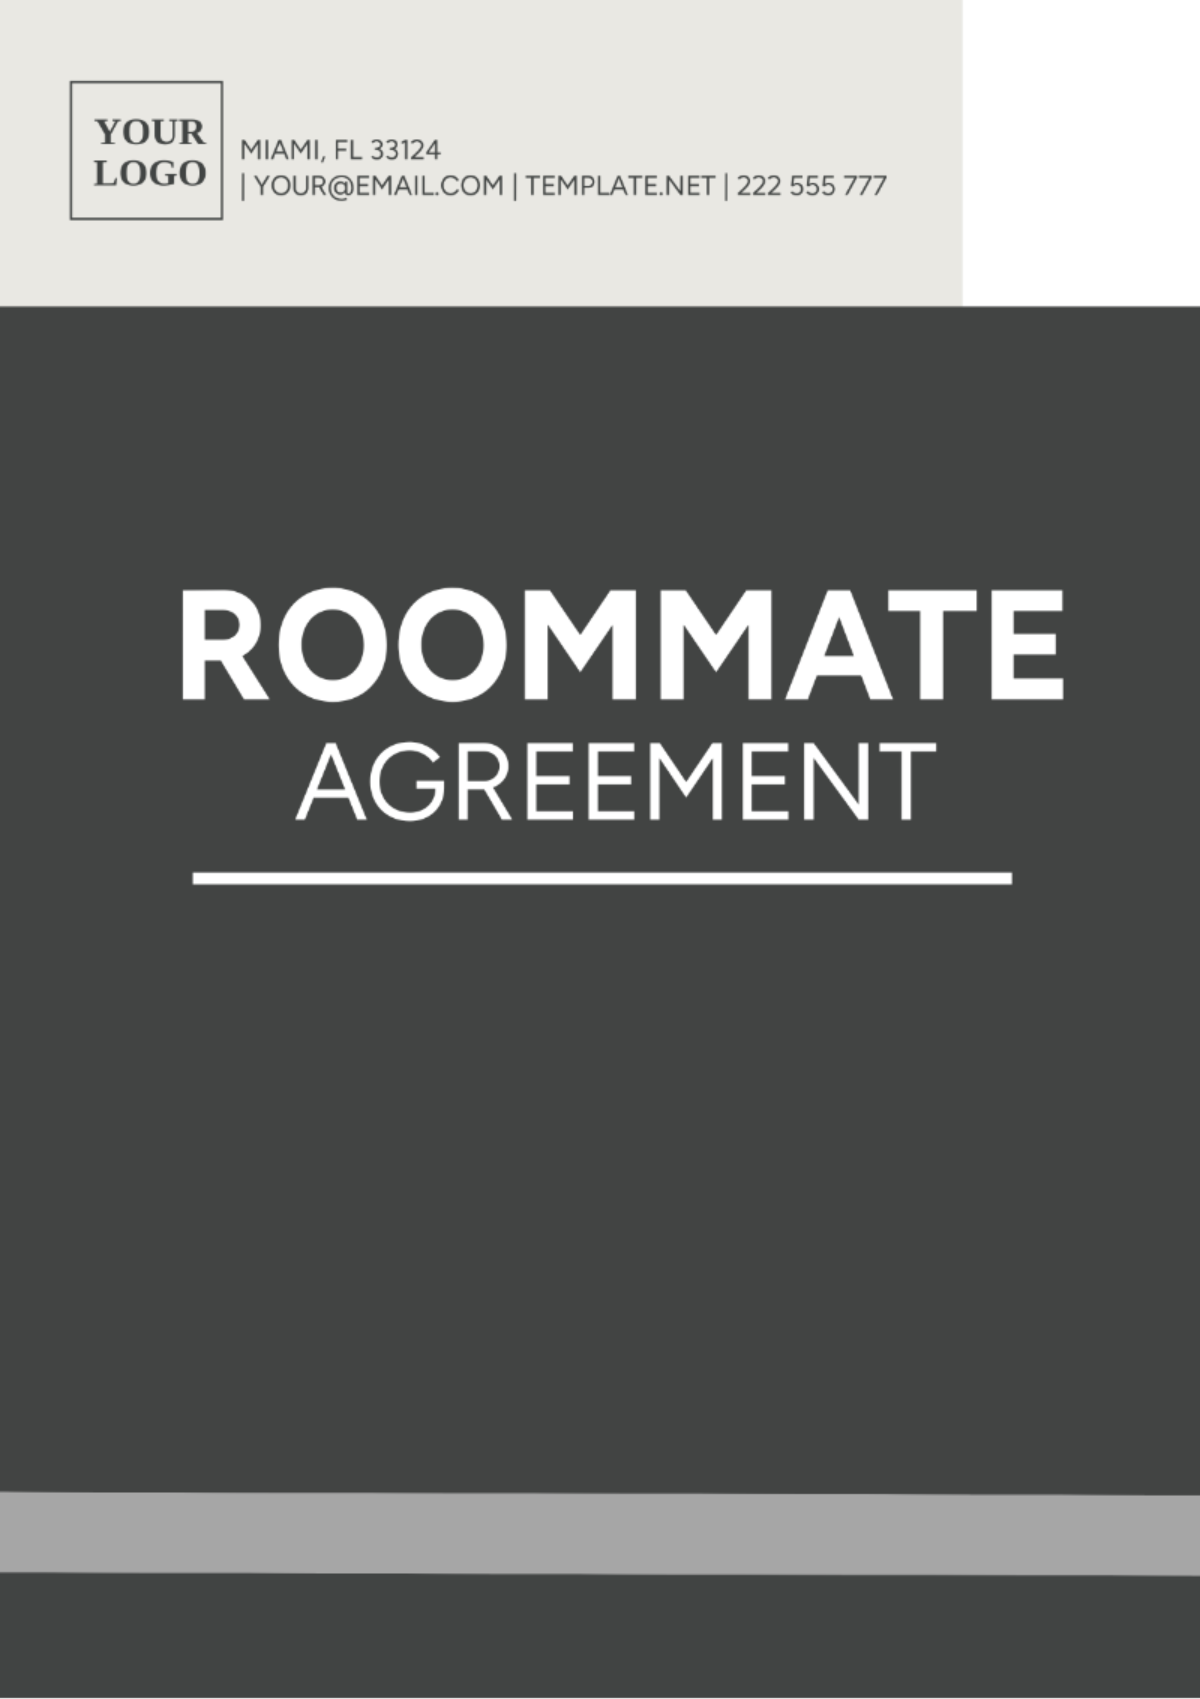 Roommate Agreement Template